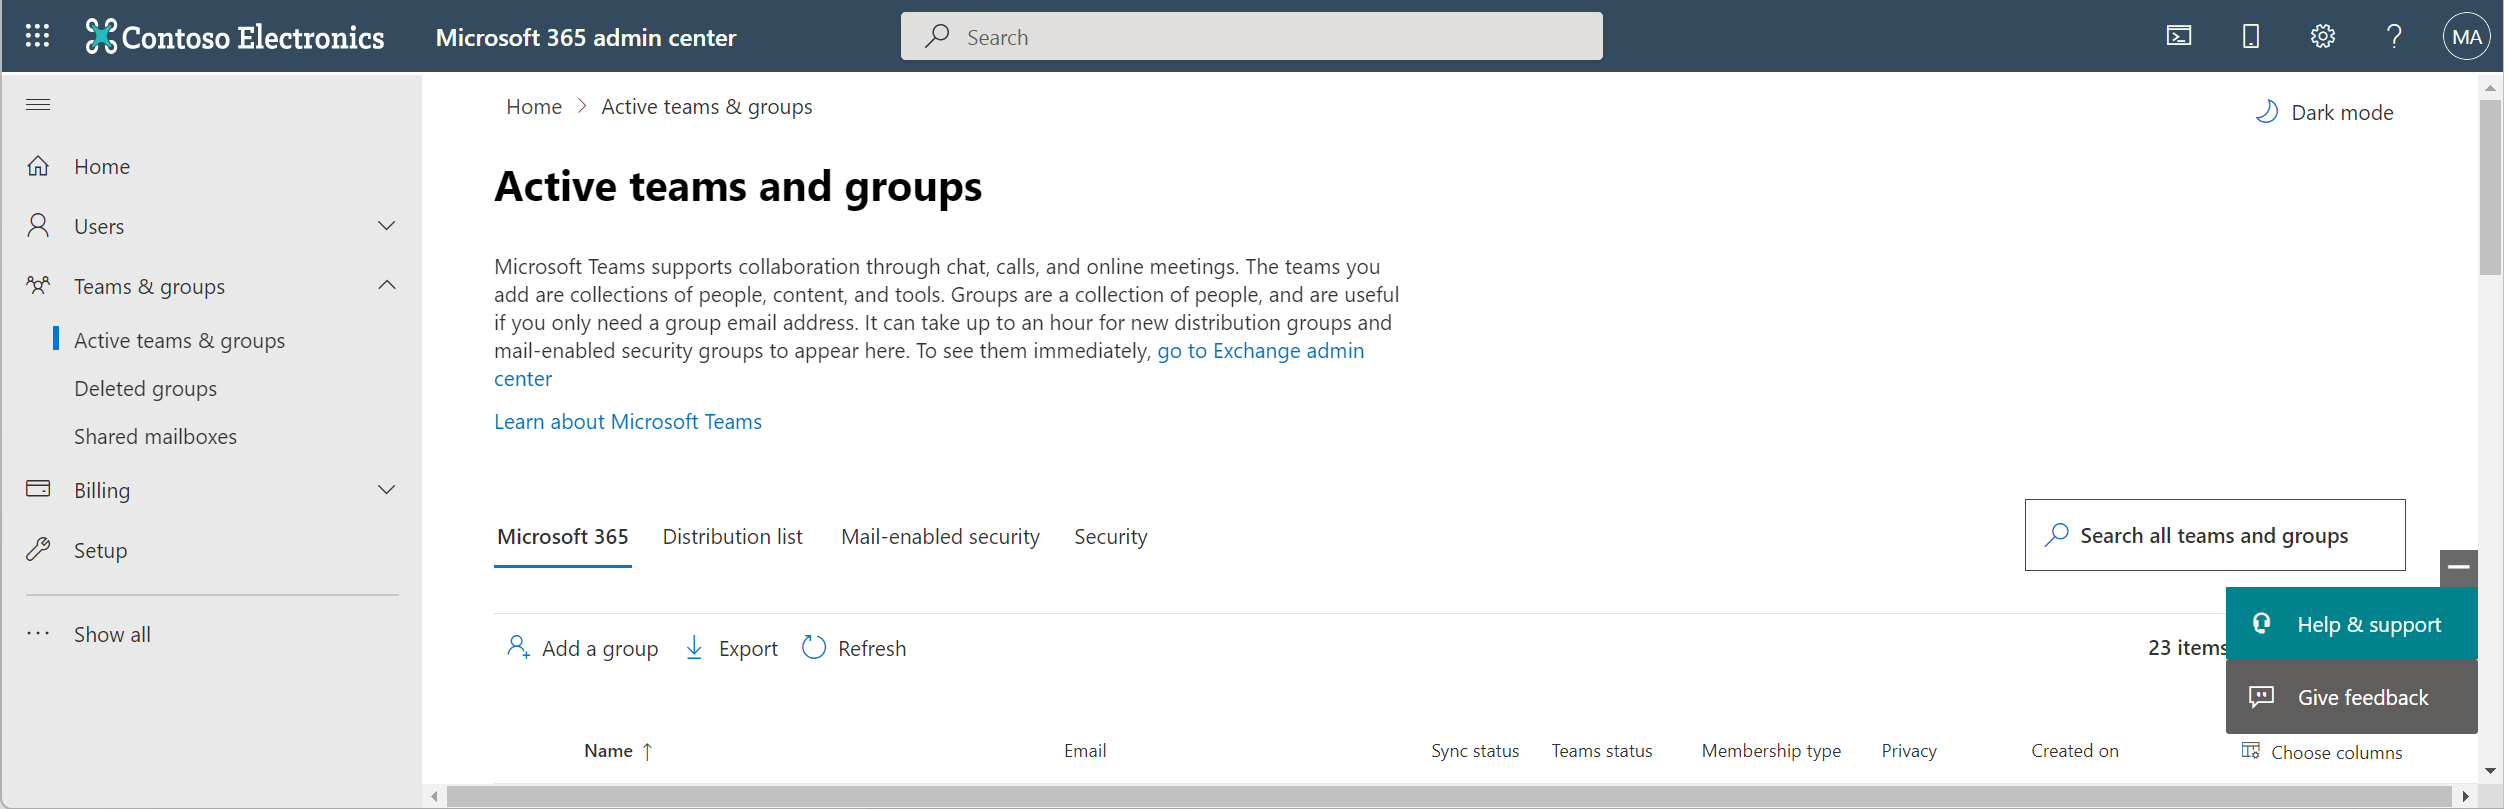 A screenshot showing the active groups in the Microsoft 365 admin center.